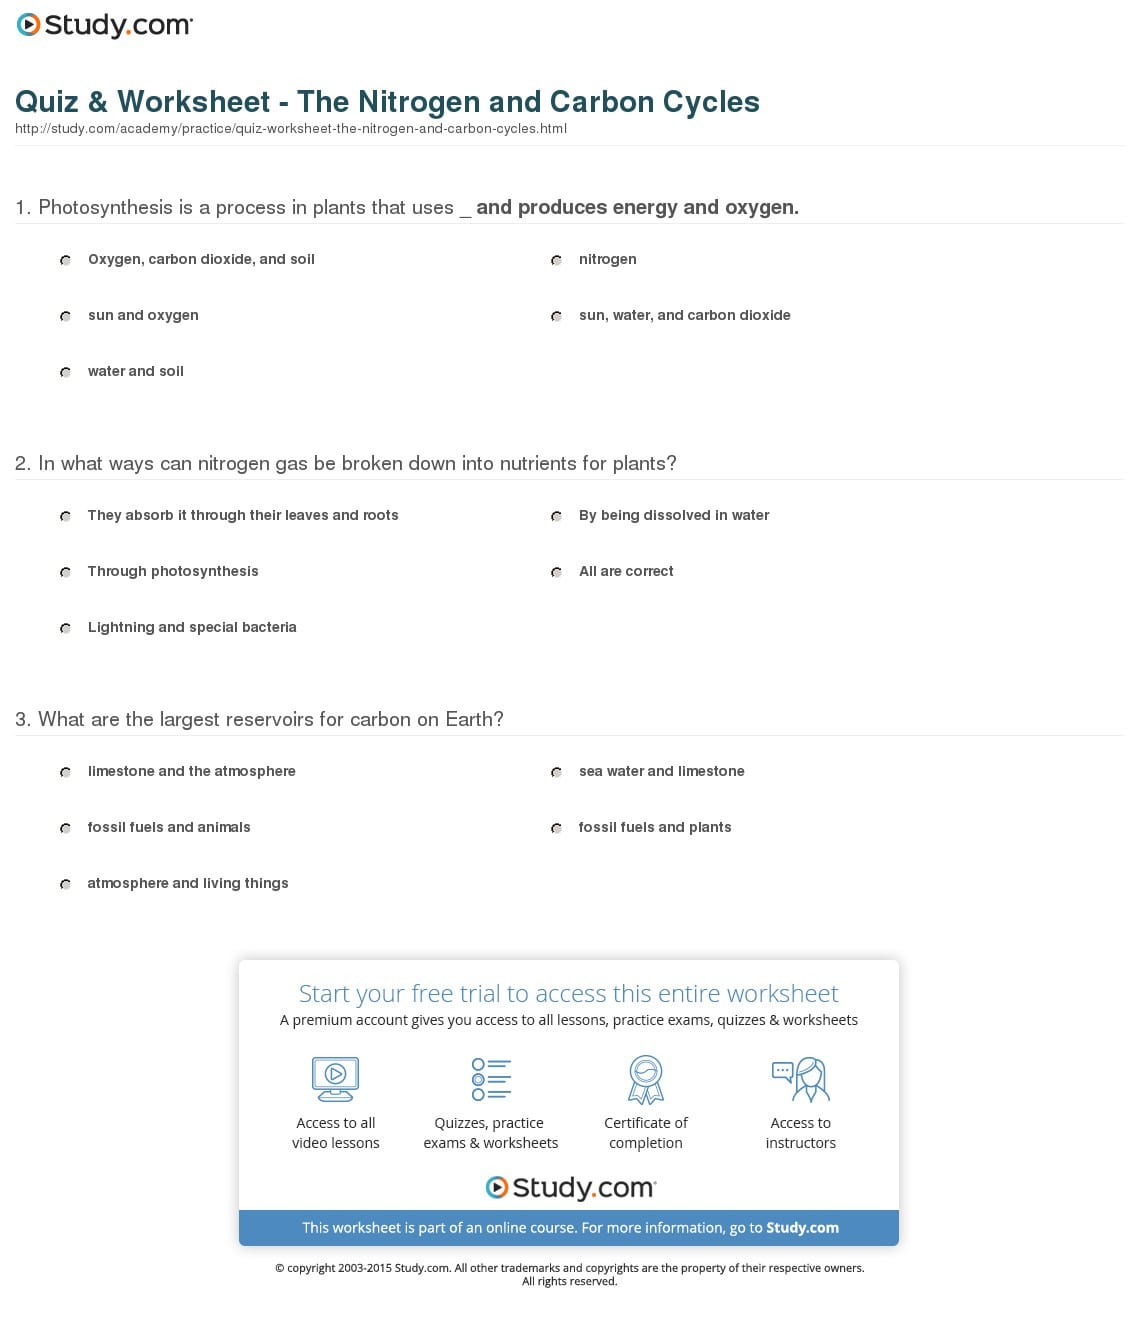 cycles-of-matter-worksheet-answers-db-excel